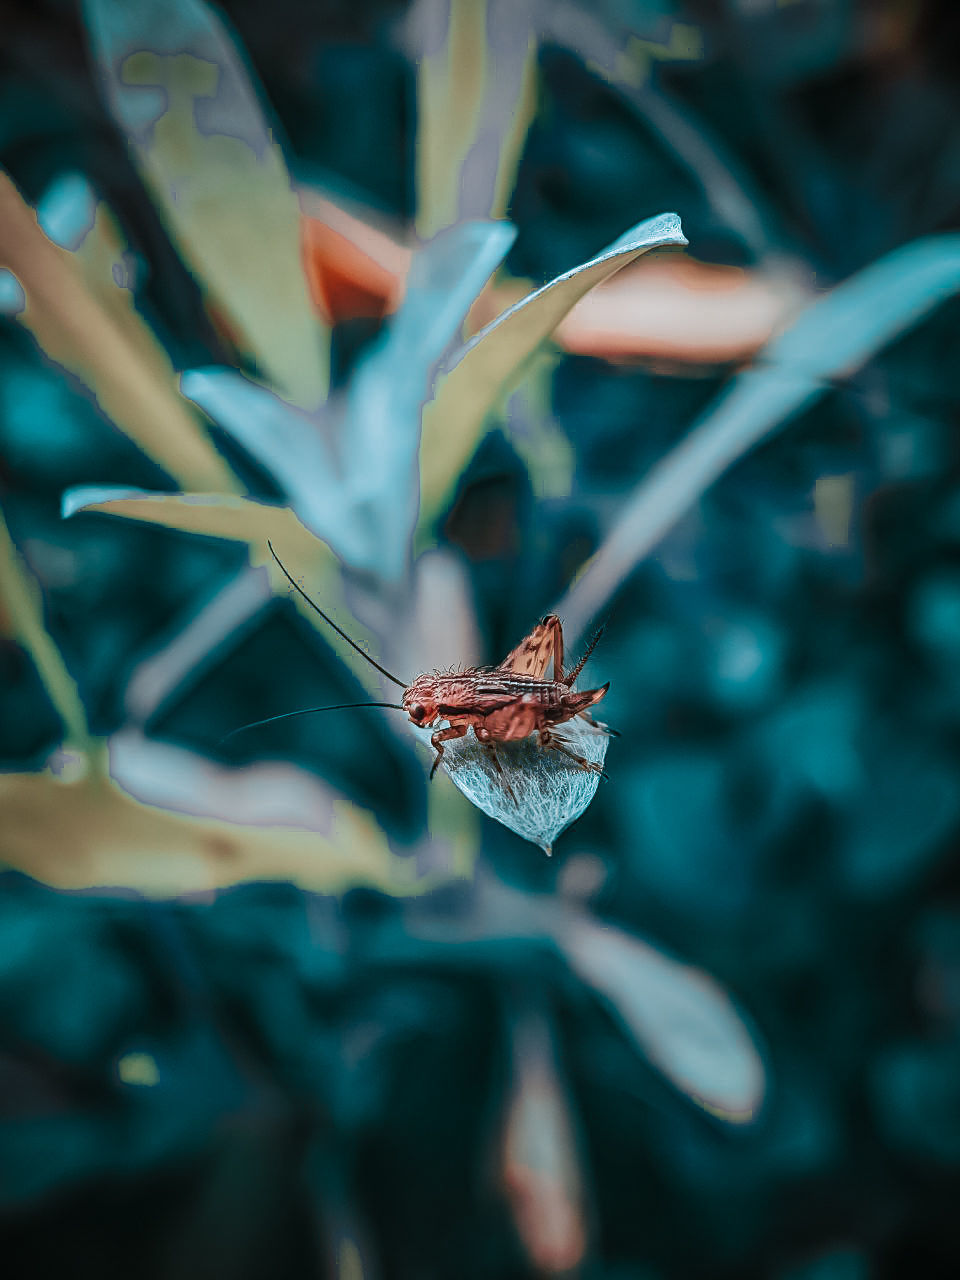 leaf, flower, animal, animal wildlife, animal themes, nature, plant, macro photography, insect, wildlife, close-up, butterfly, green, beauty in nature, blue, no people, one animal, branch, plant part, outdoors, focus on foreground, animal wing, flowering plant, selective focus